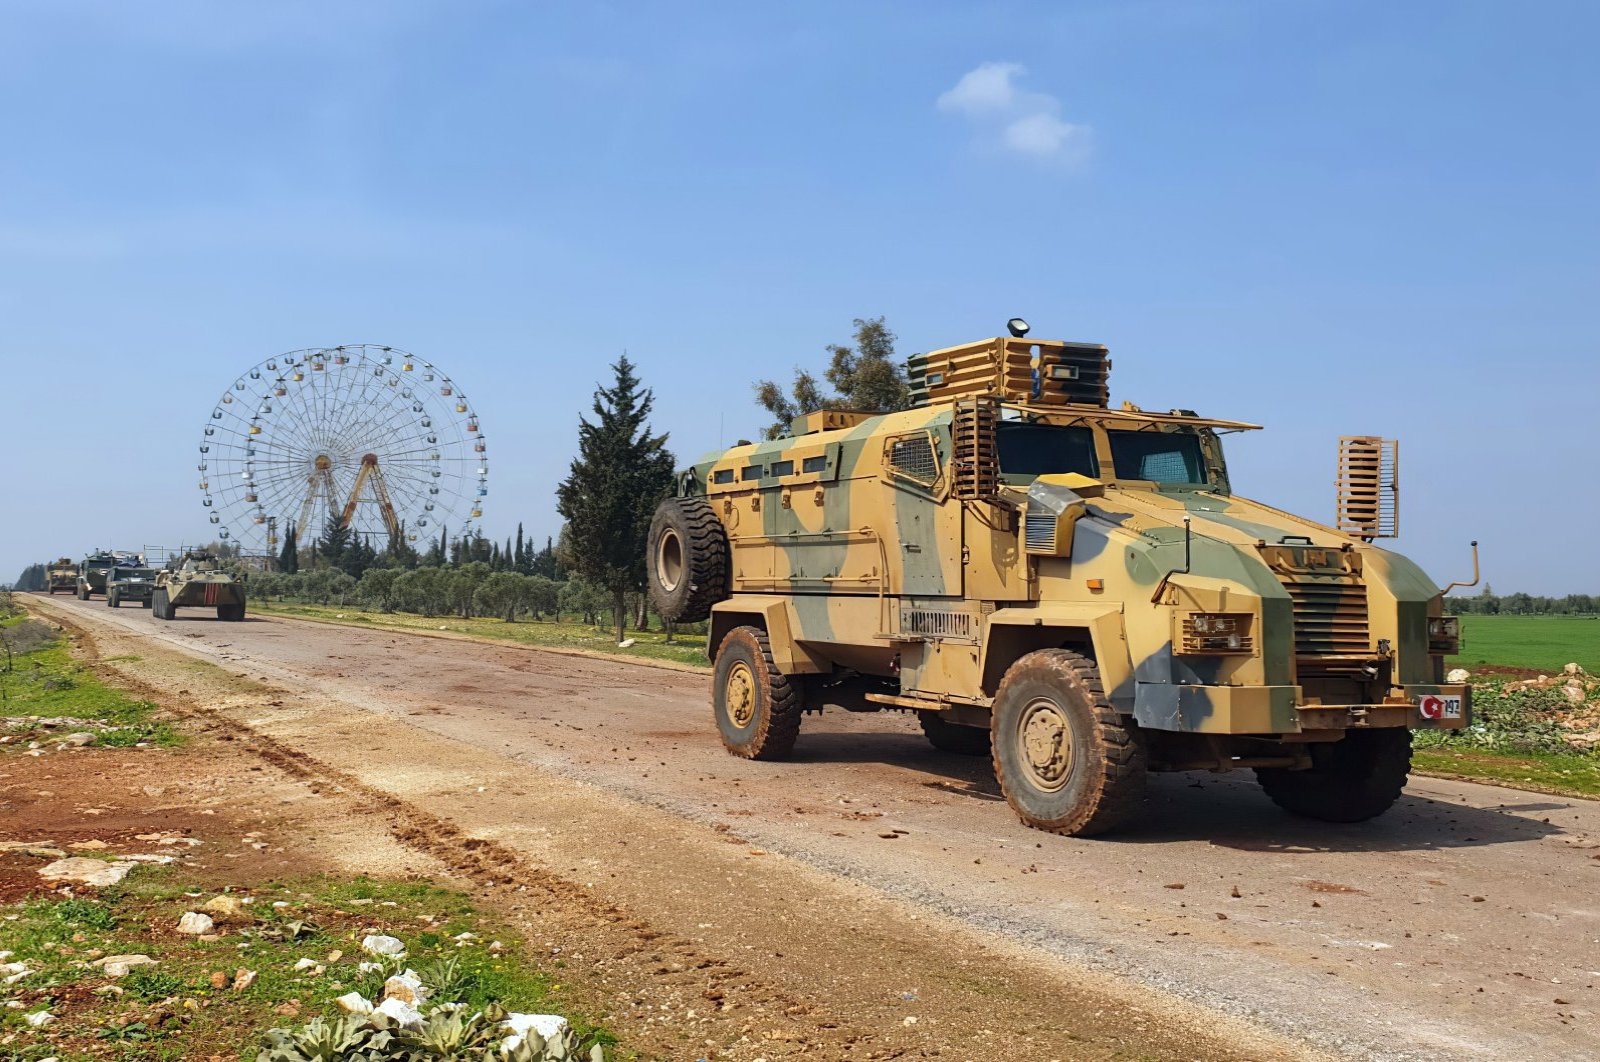 Turkish and Russian troops patrol the M4 highway, which runs east-west through Idlib province, northwest Syria, March 15, 2020. (AP Photo)